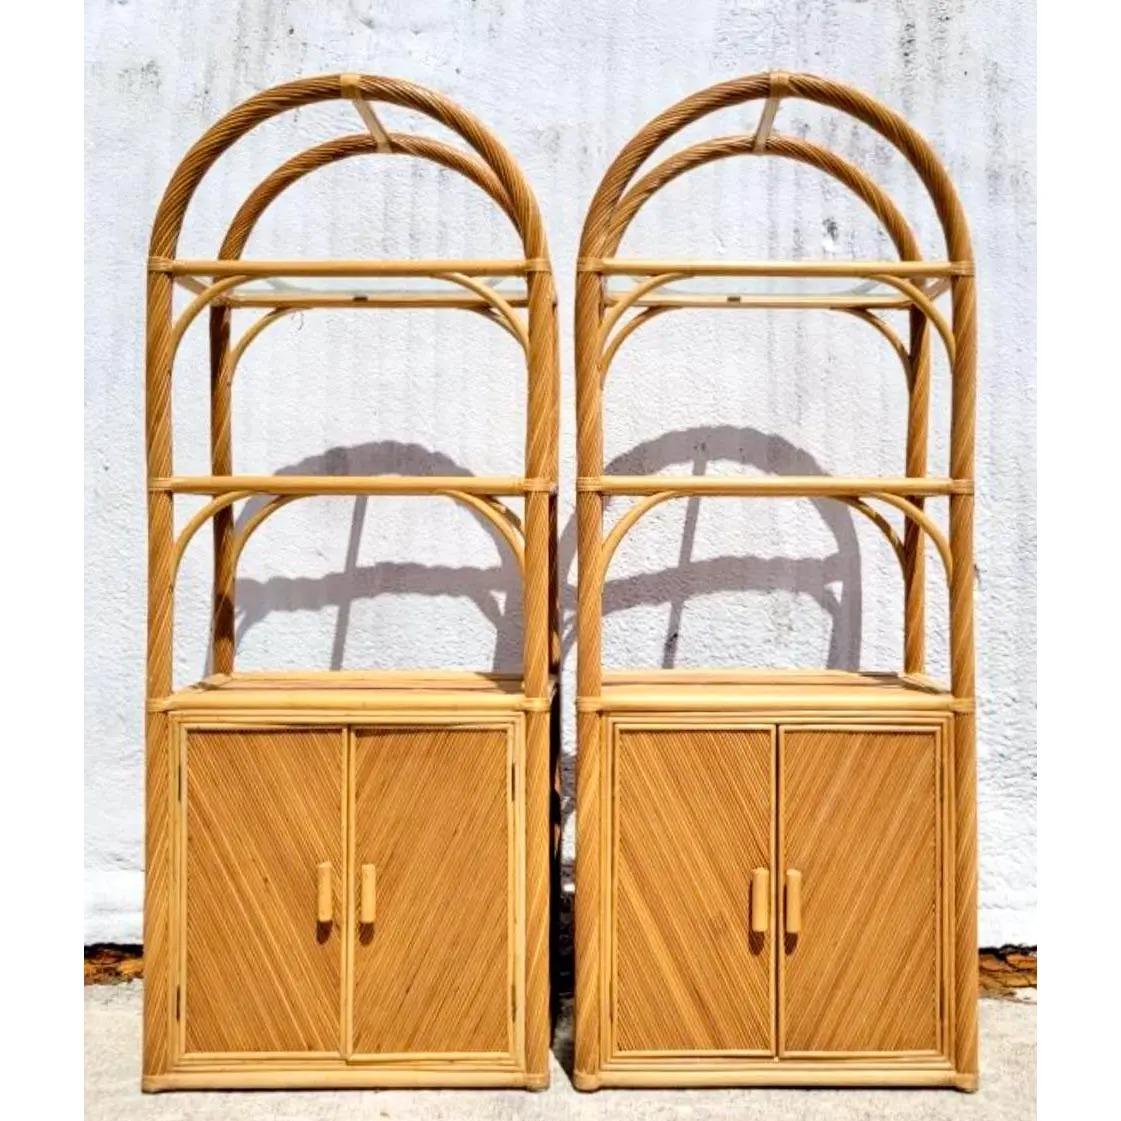 20th Century Vintage Coastal Arched Pencil Reed Etagere, a Pair